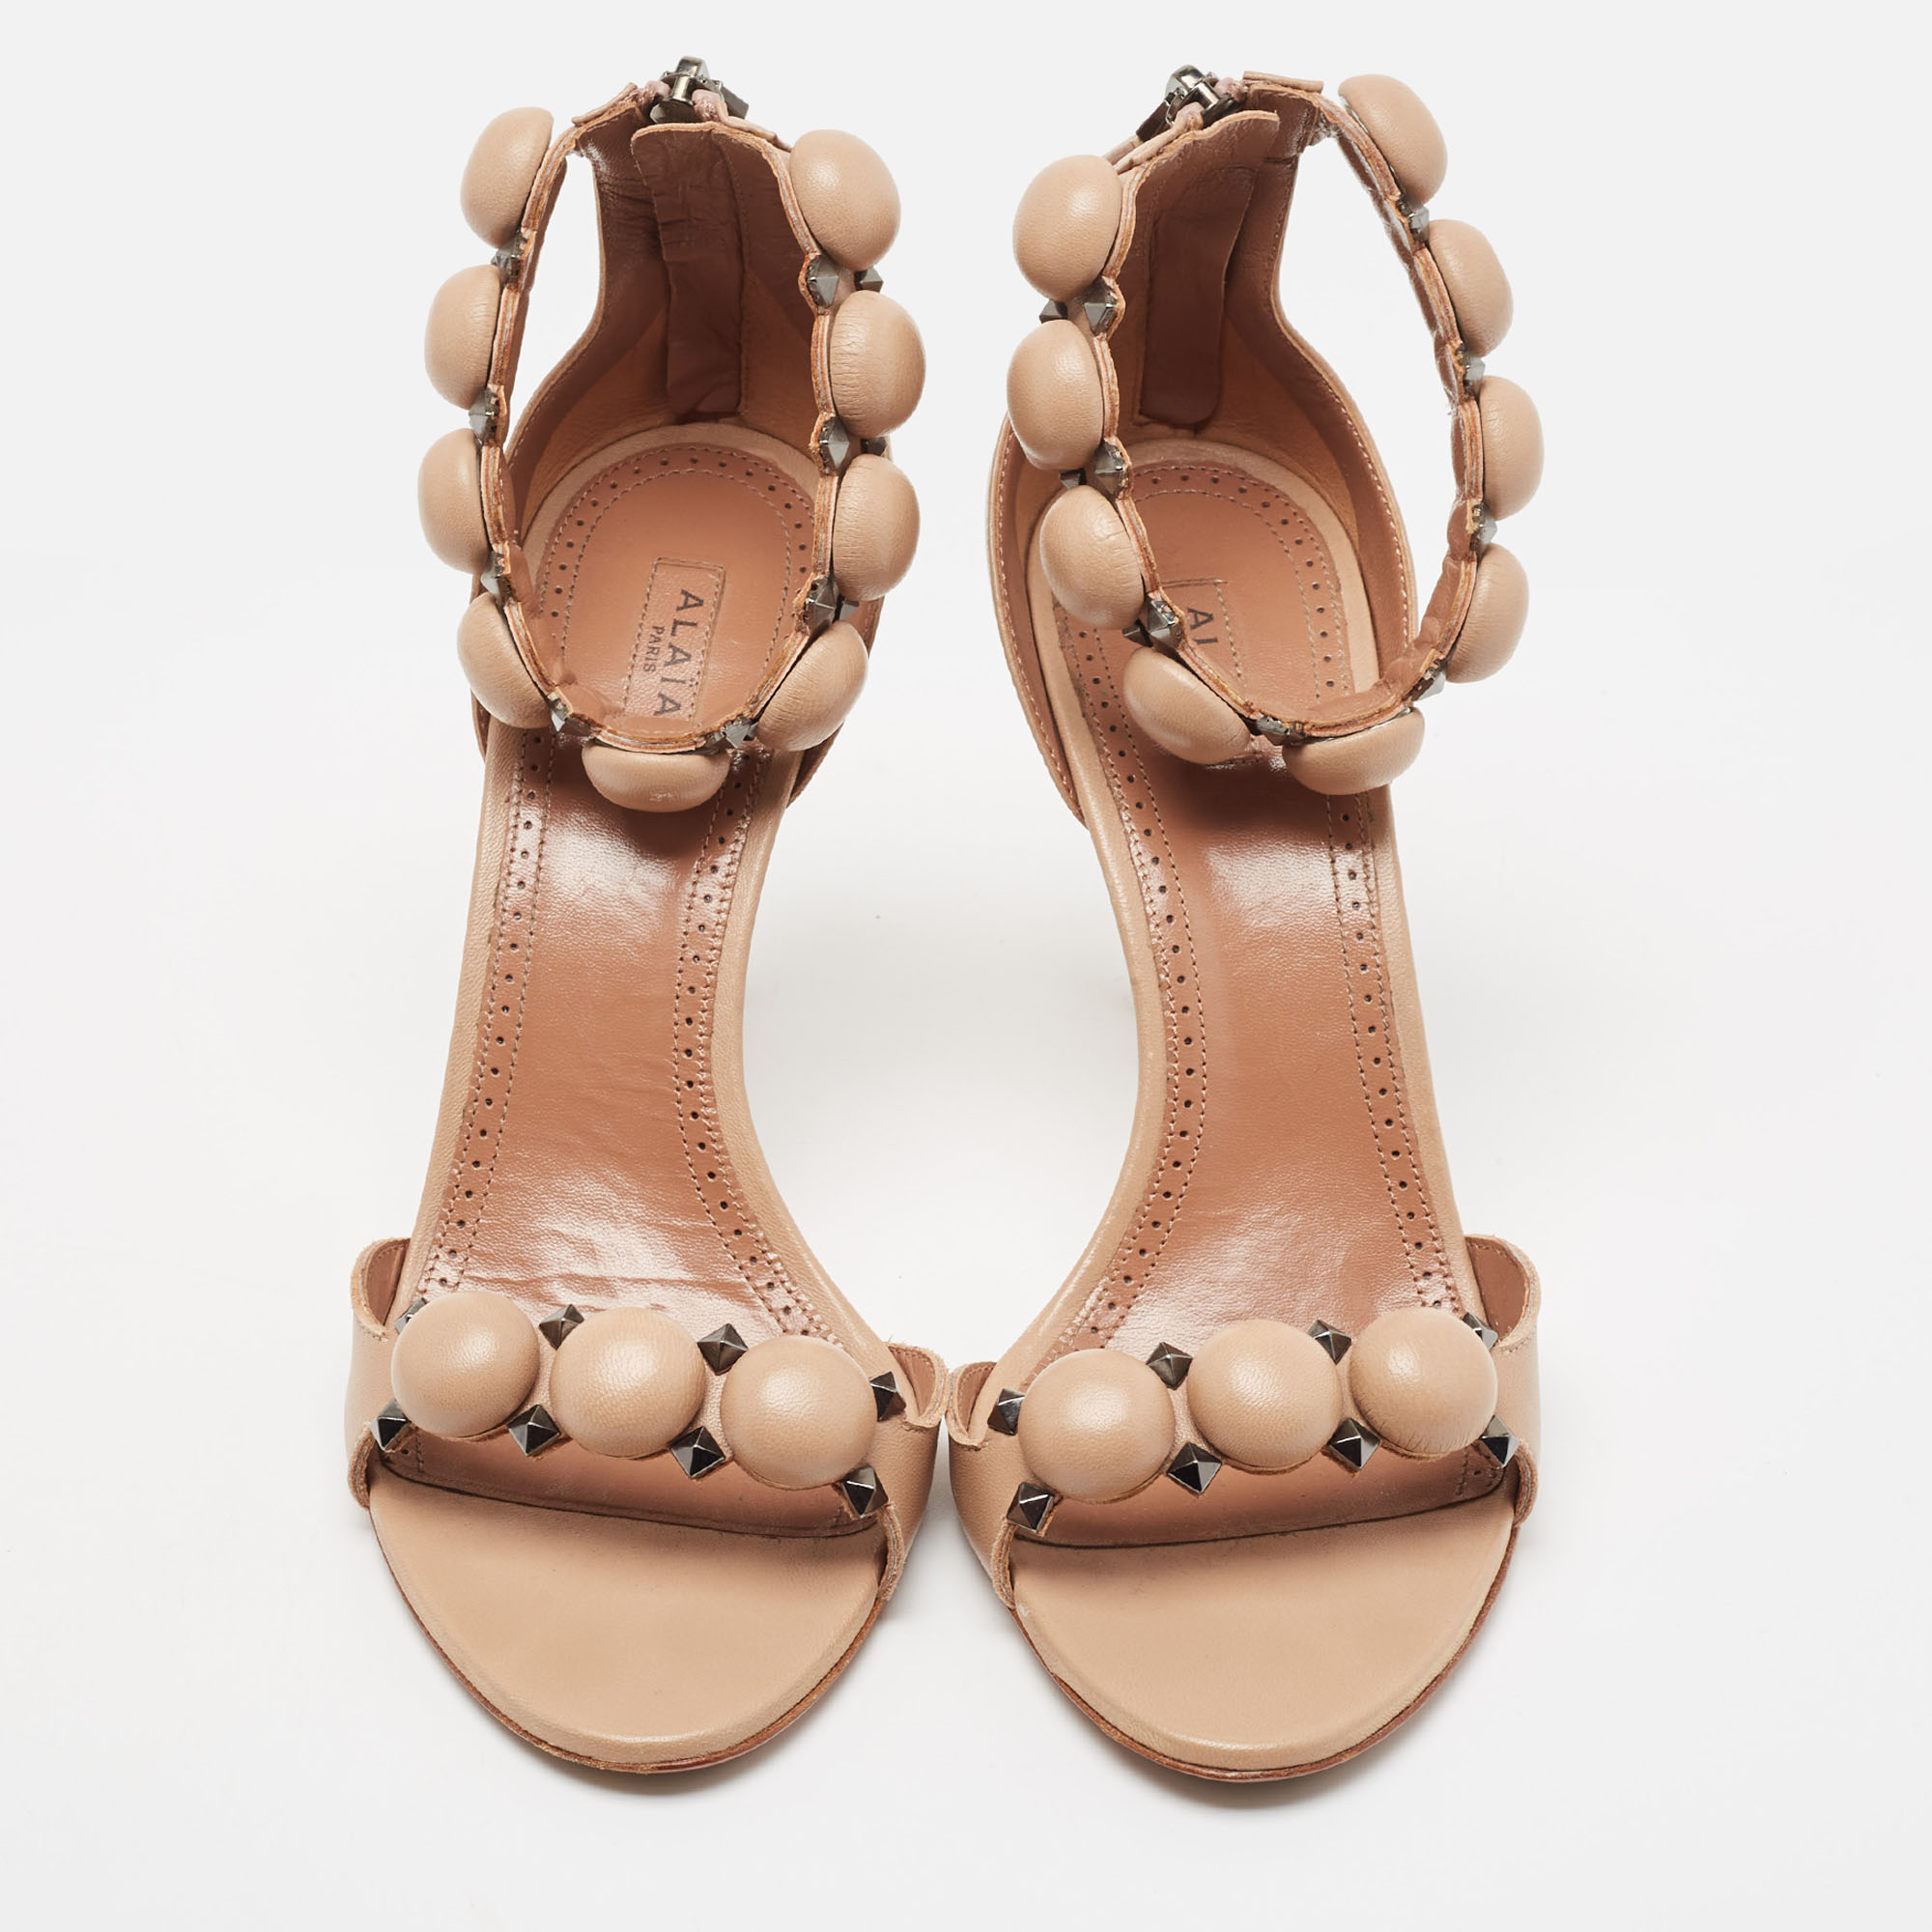 Alaia Beige Leather Bombe Ankle Strap Sandals Size 40